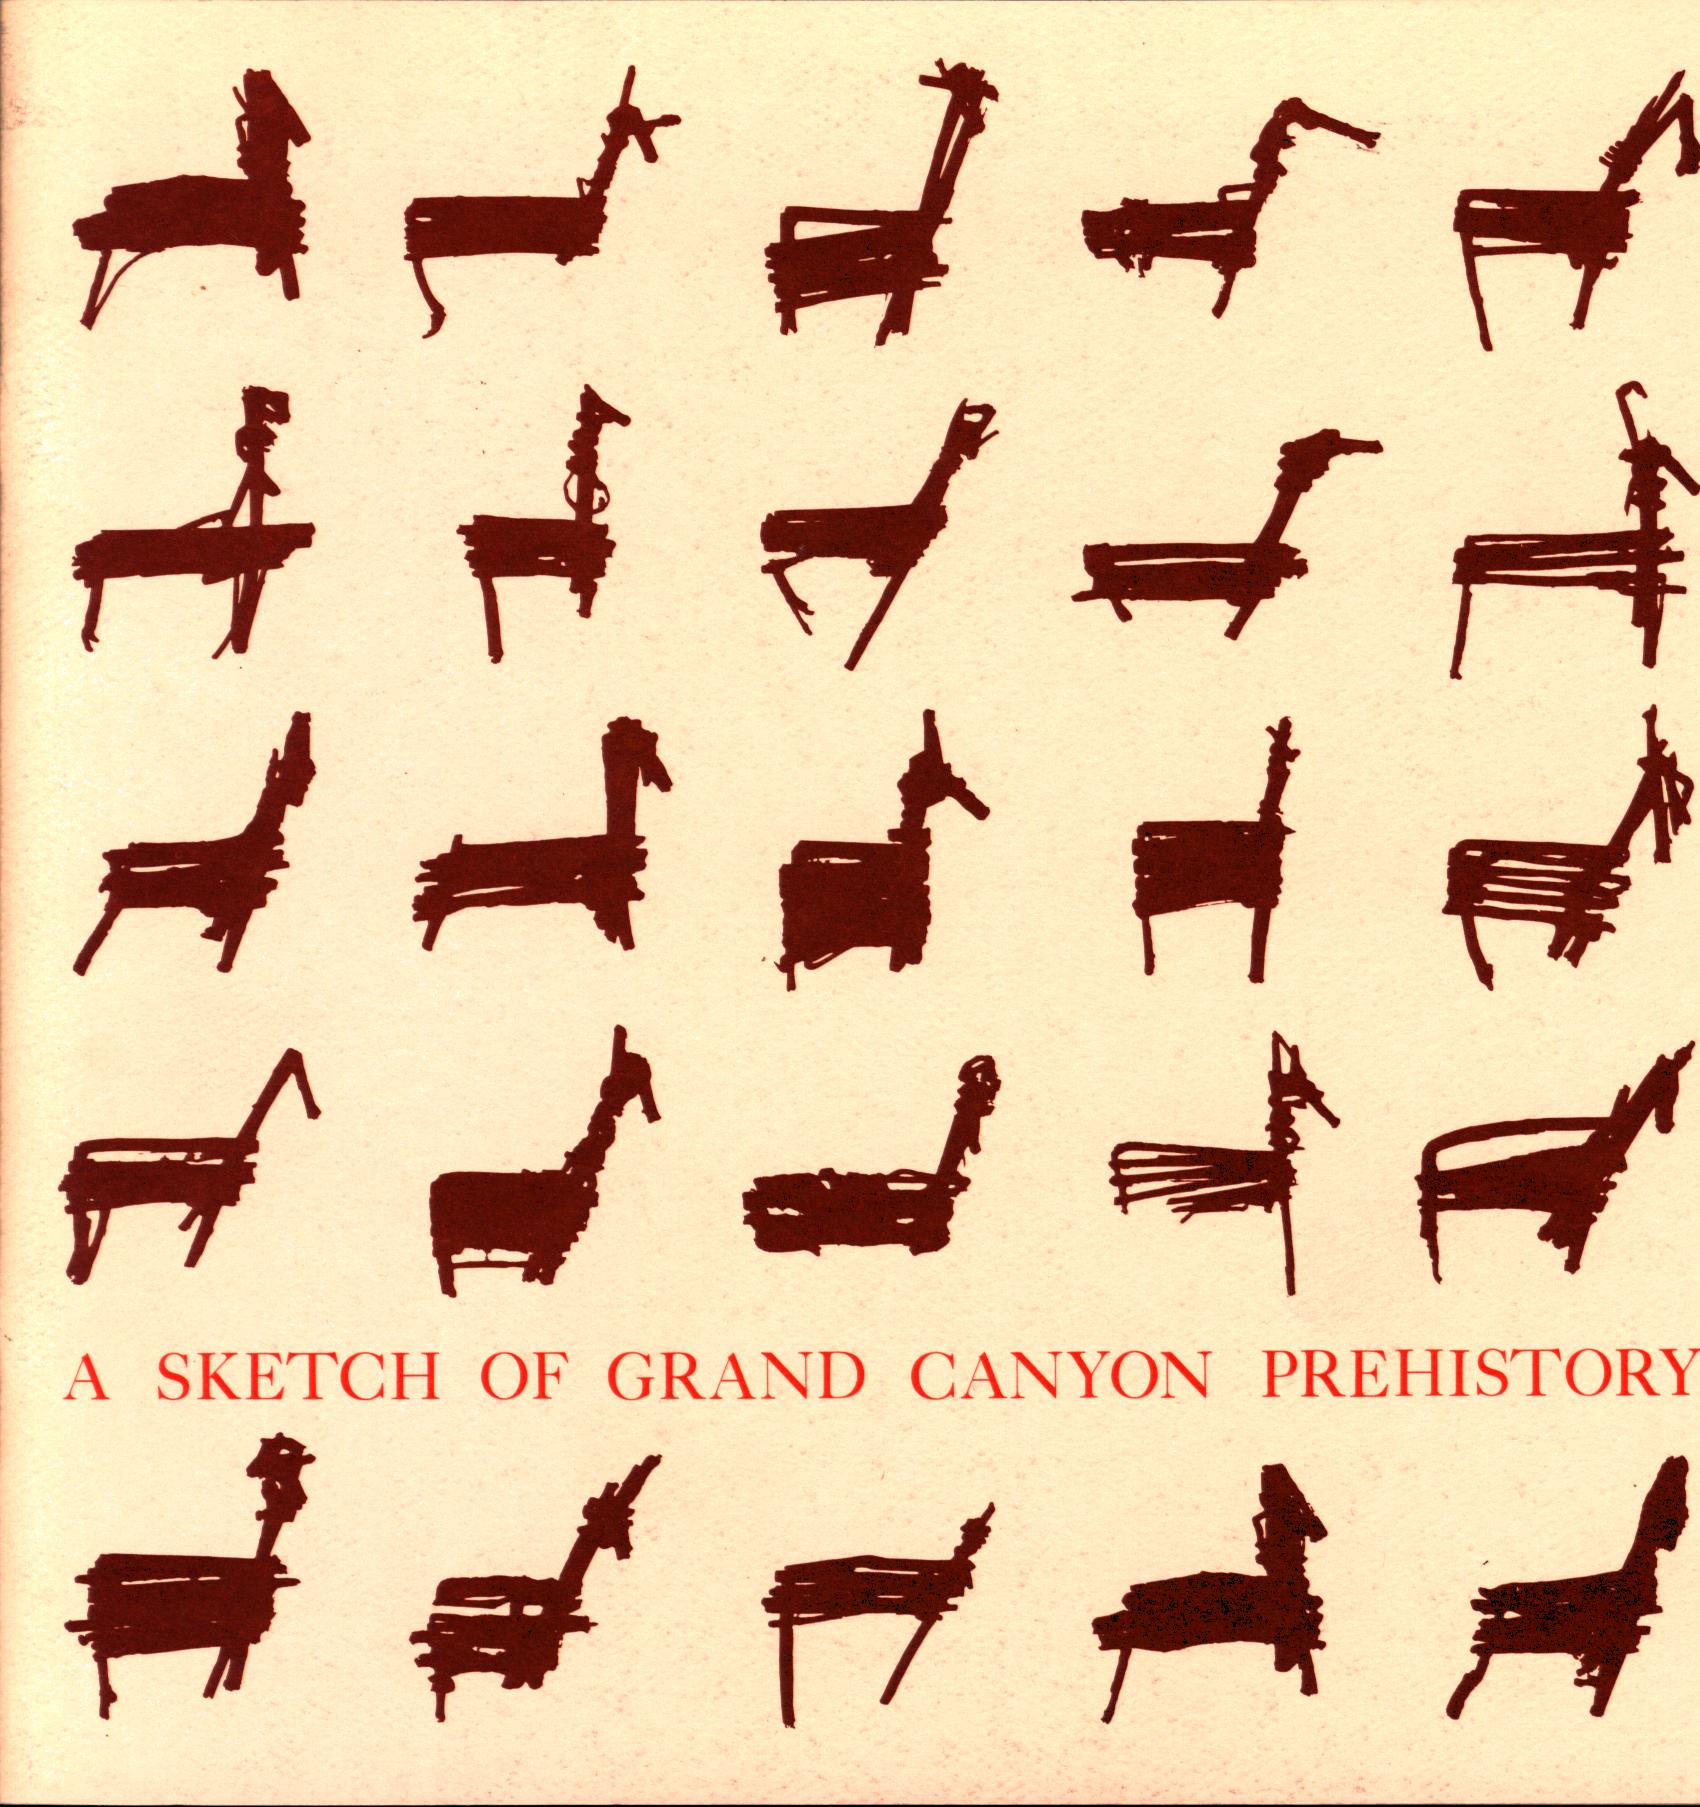 A SKETCH OF GRAND CANYON PREHISTORY.